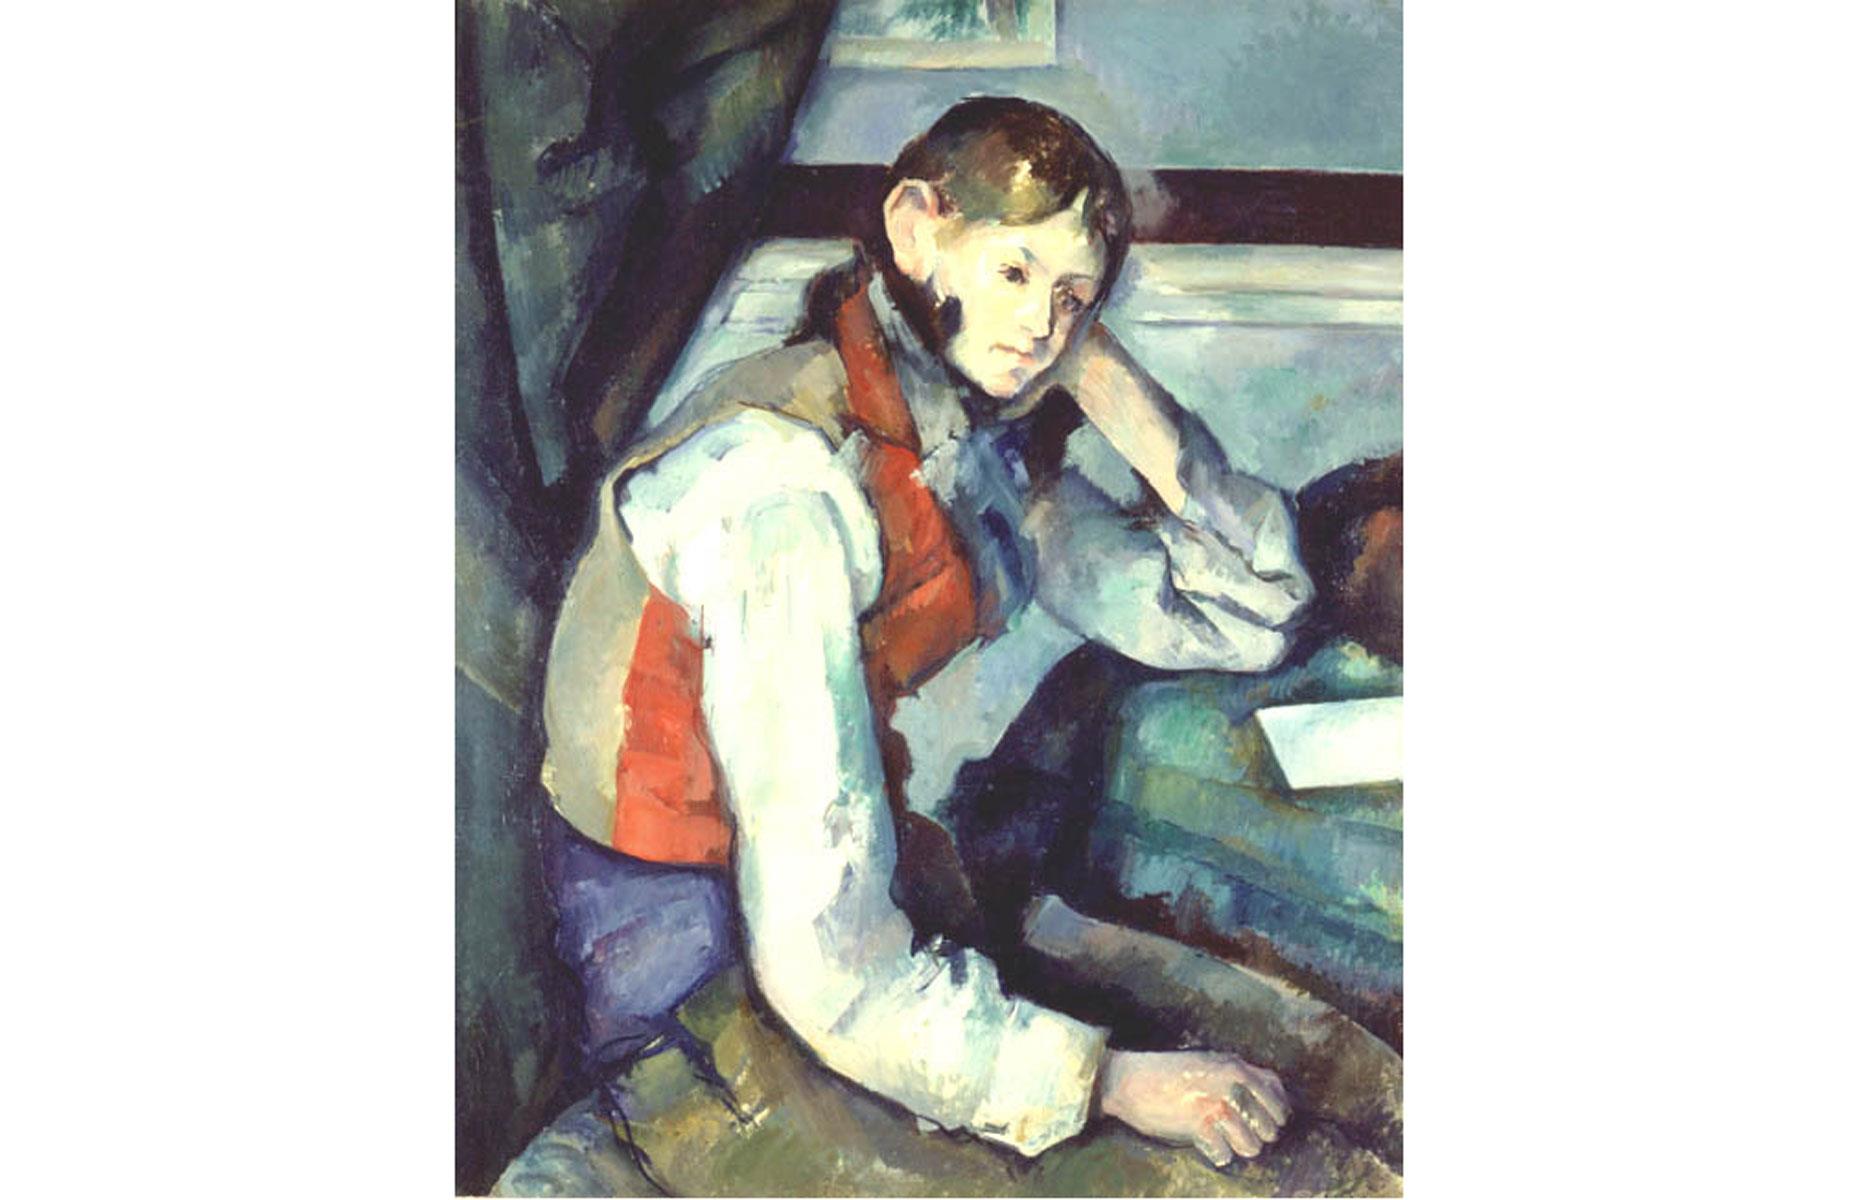 Cézanne's The Boy in the Red Vest, value: $91 million (£70.5m)